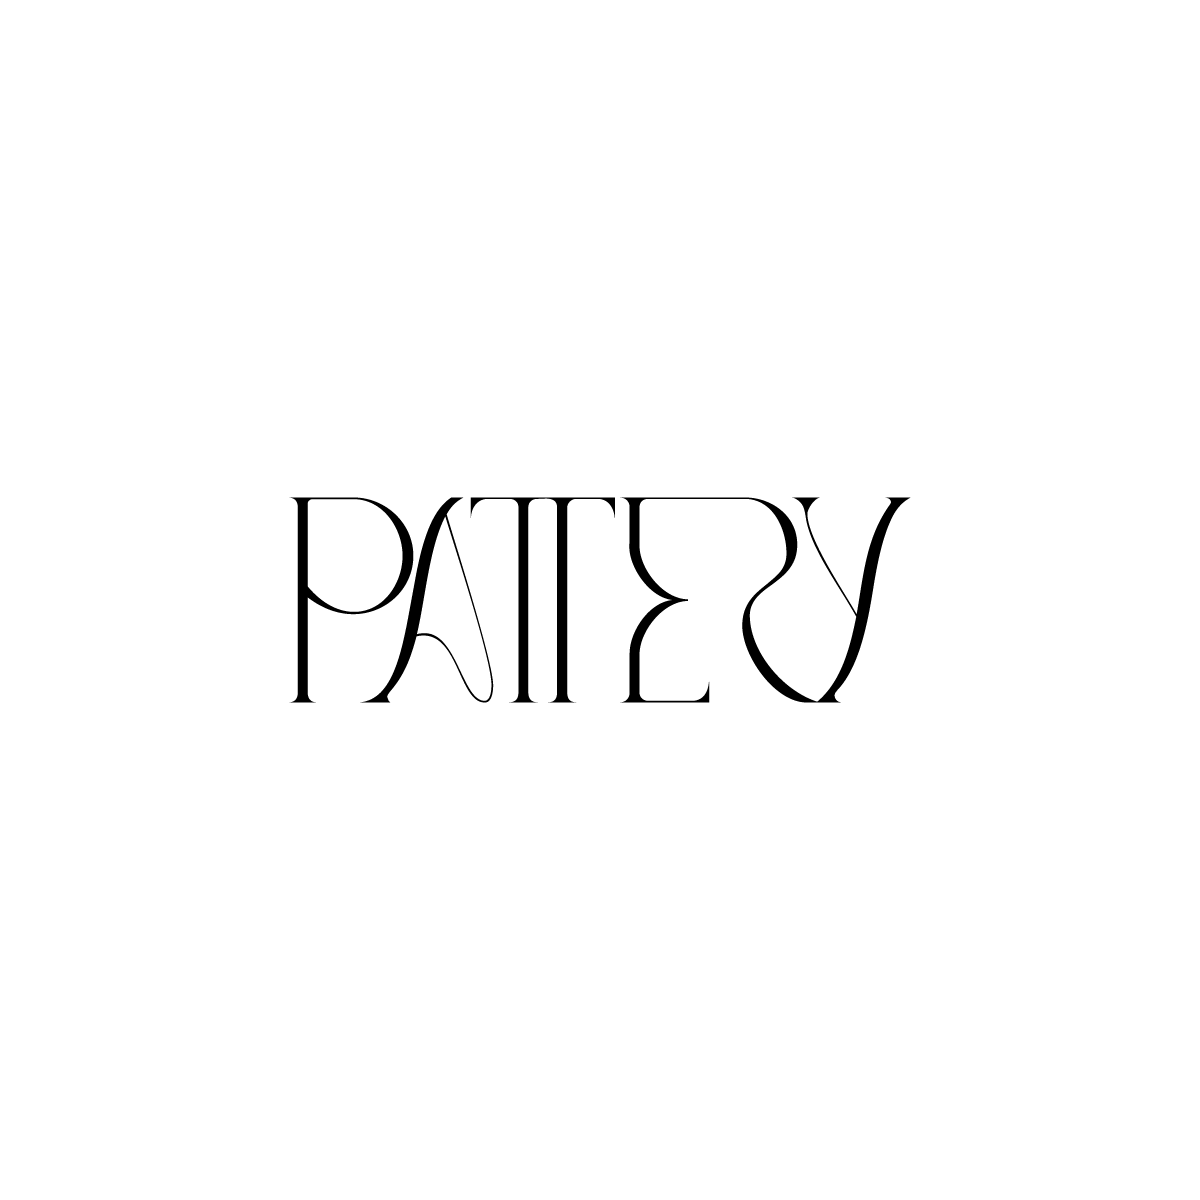 pattery_1200px_2b.png